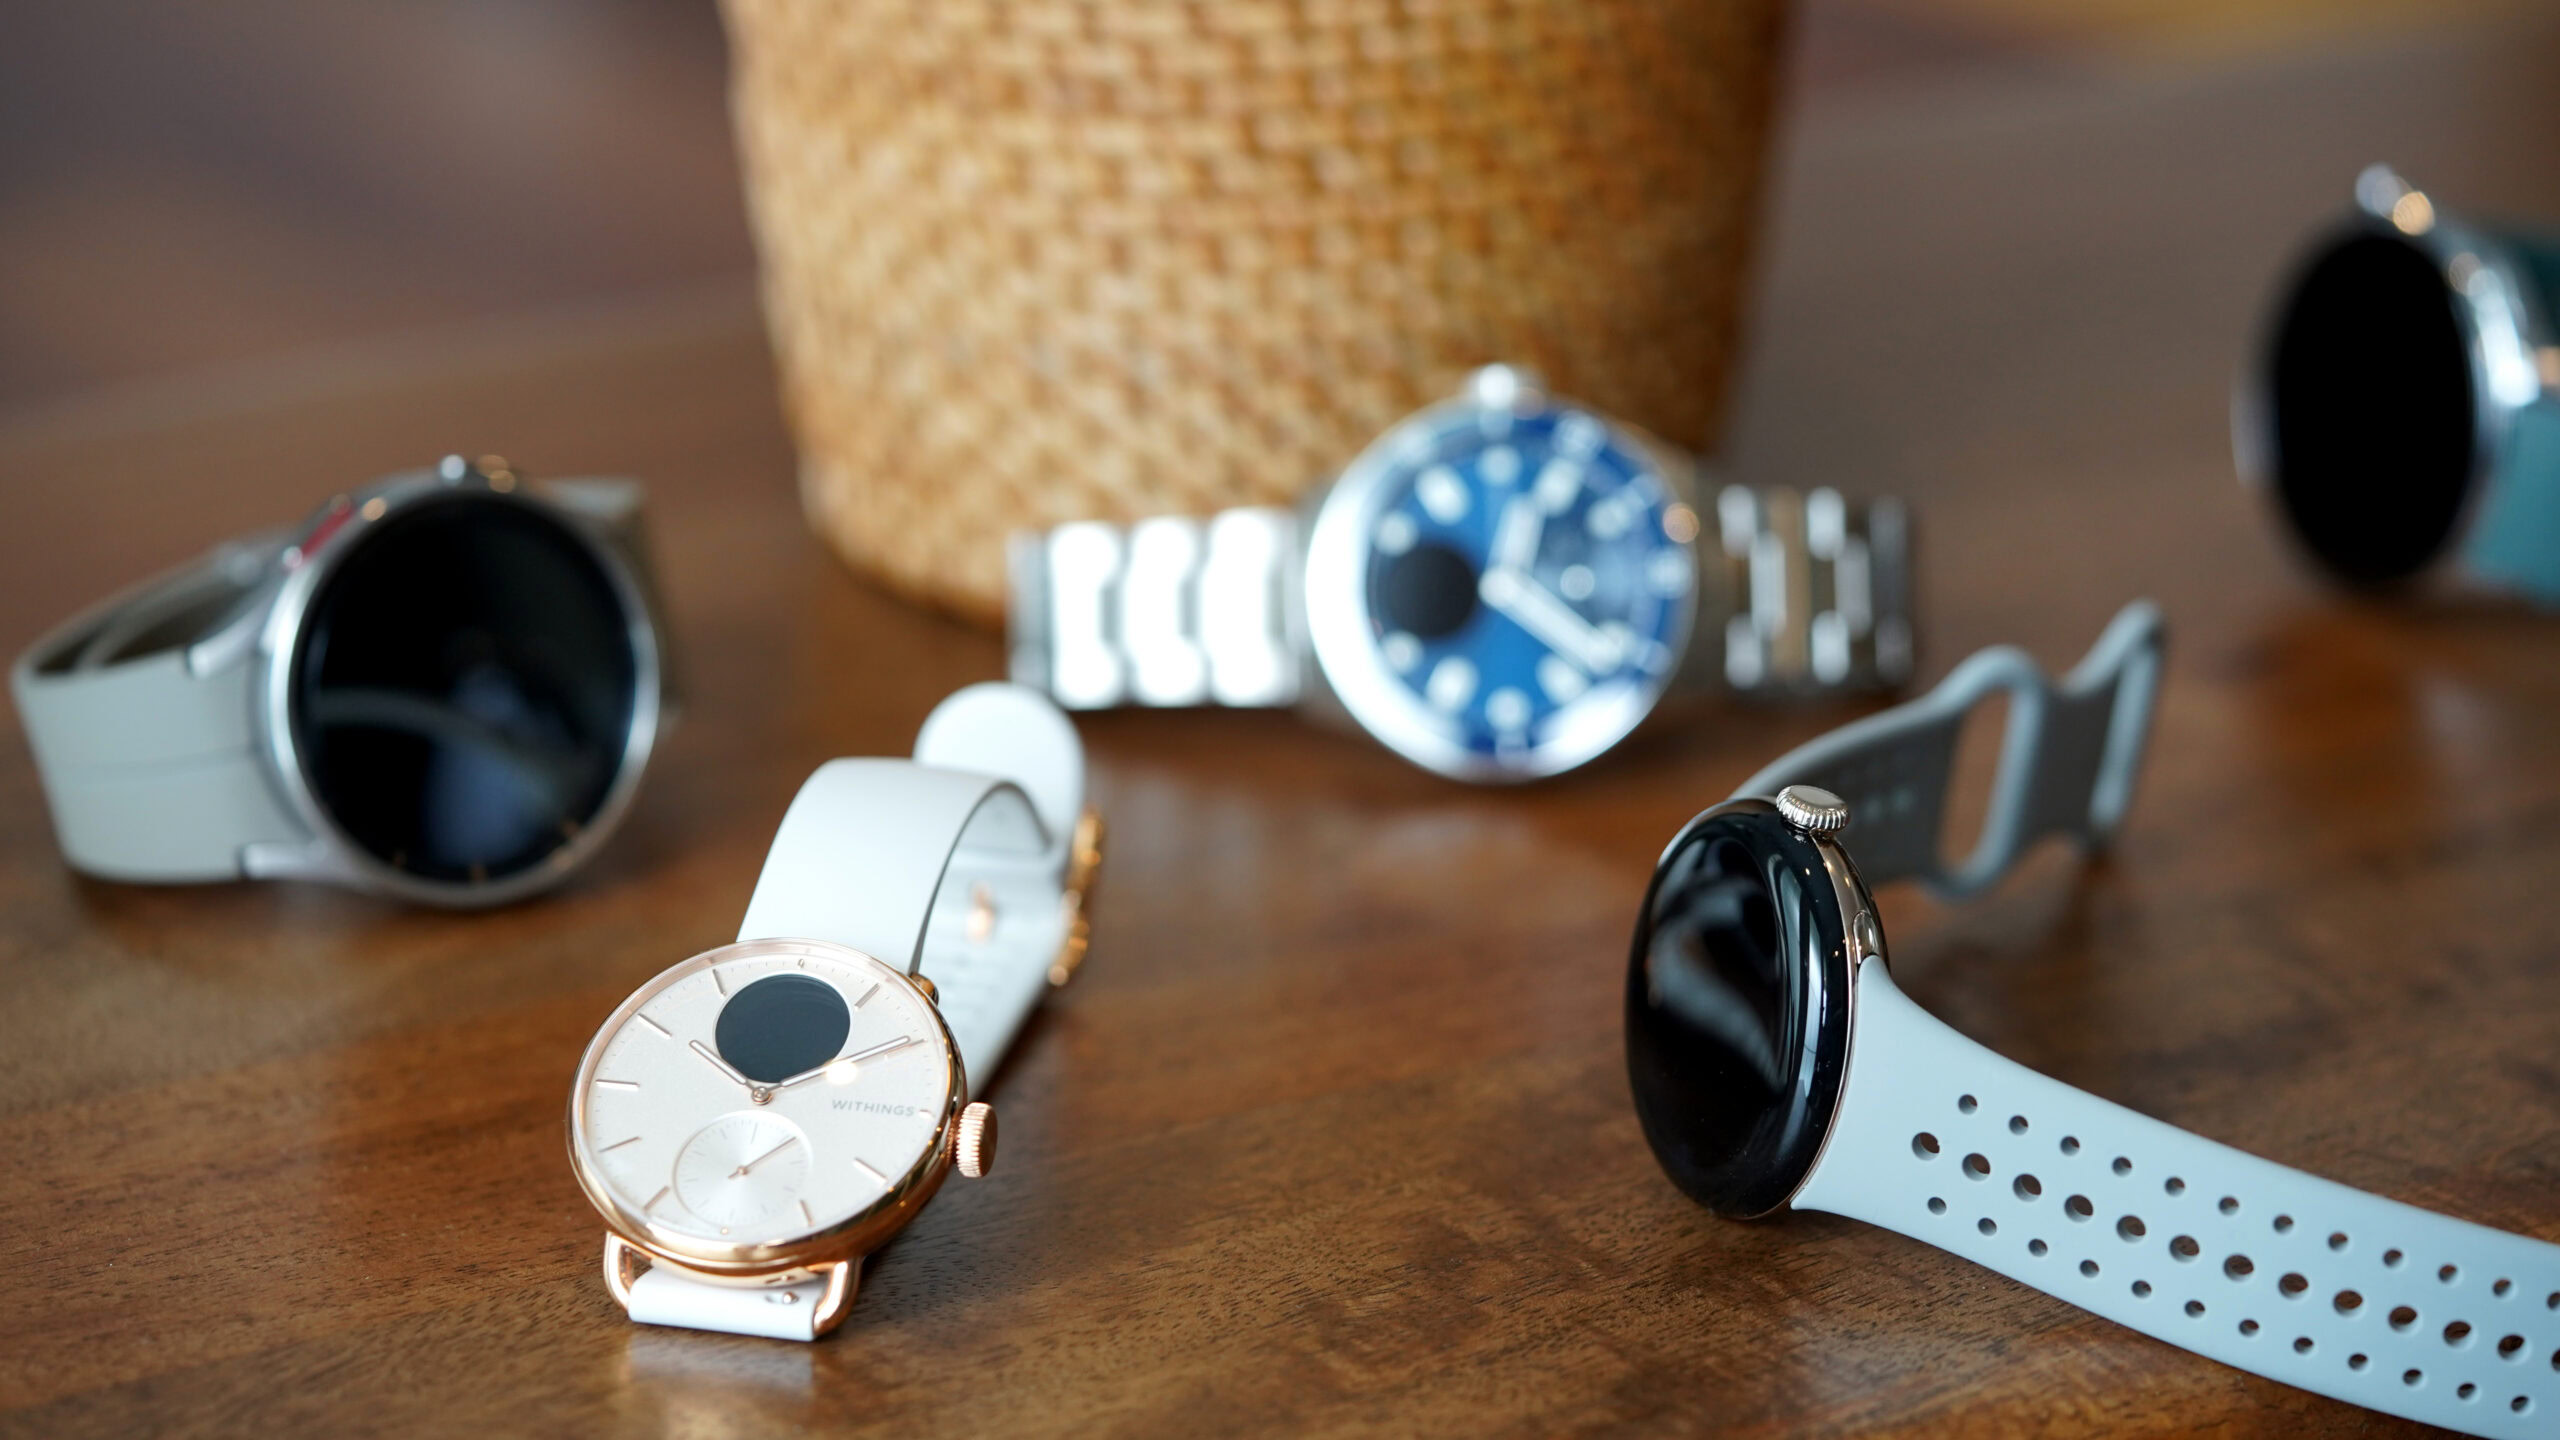 A variety of smartwatches and hybrid devices rest on a wooden surface.